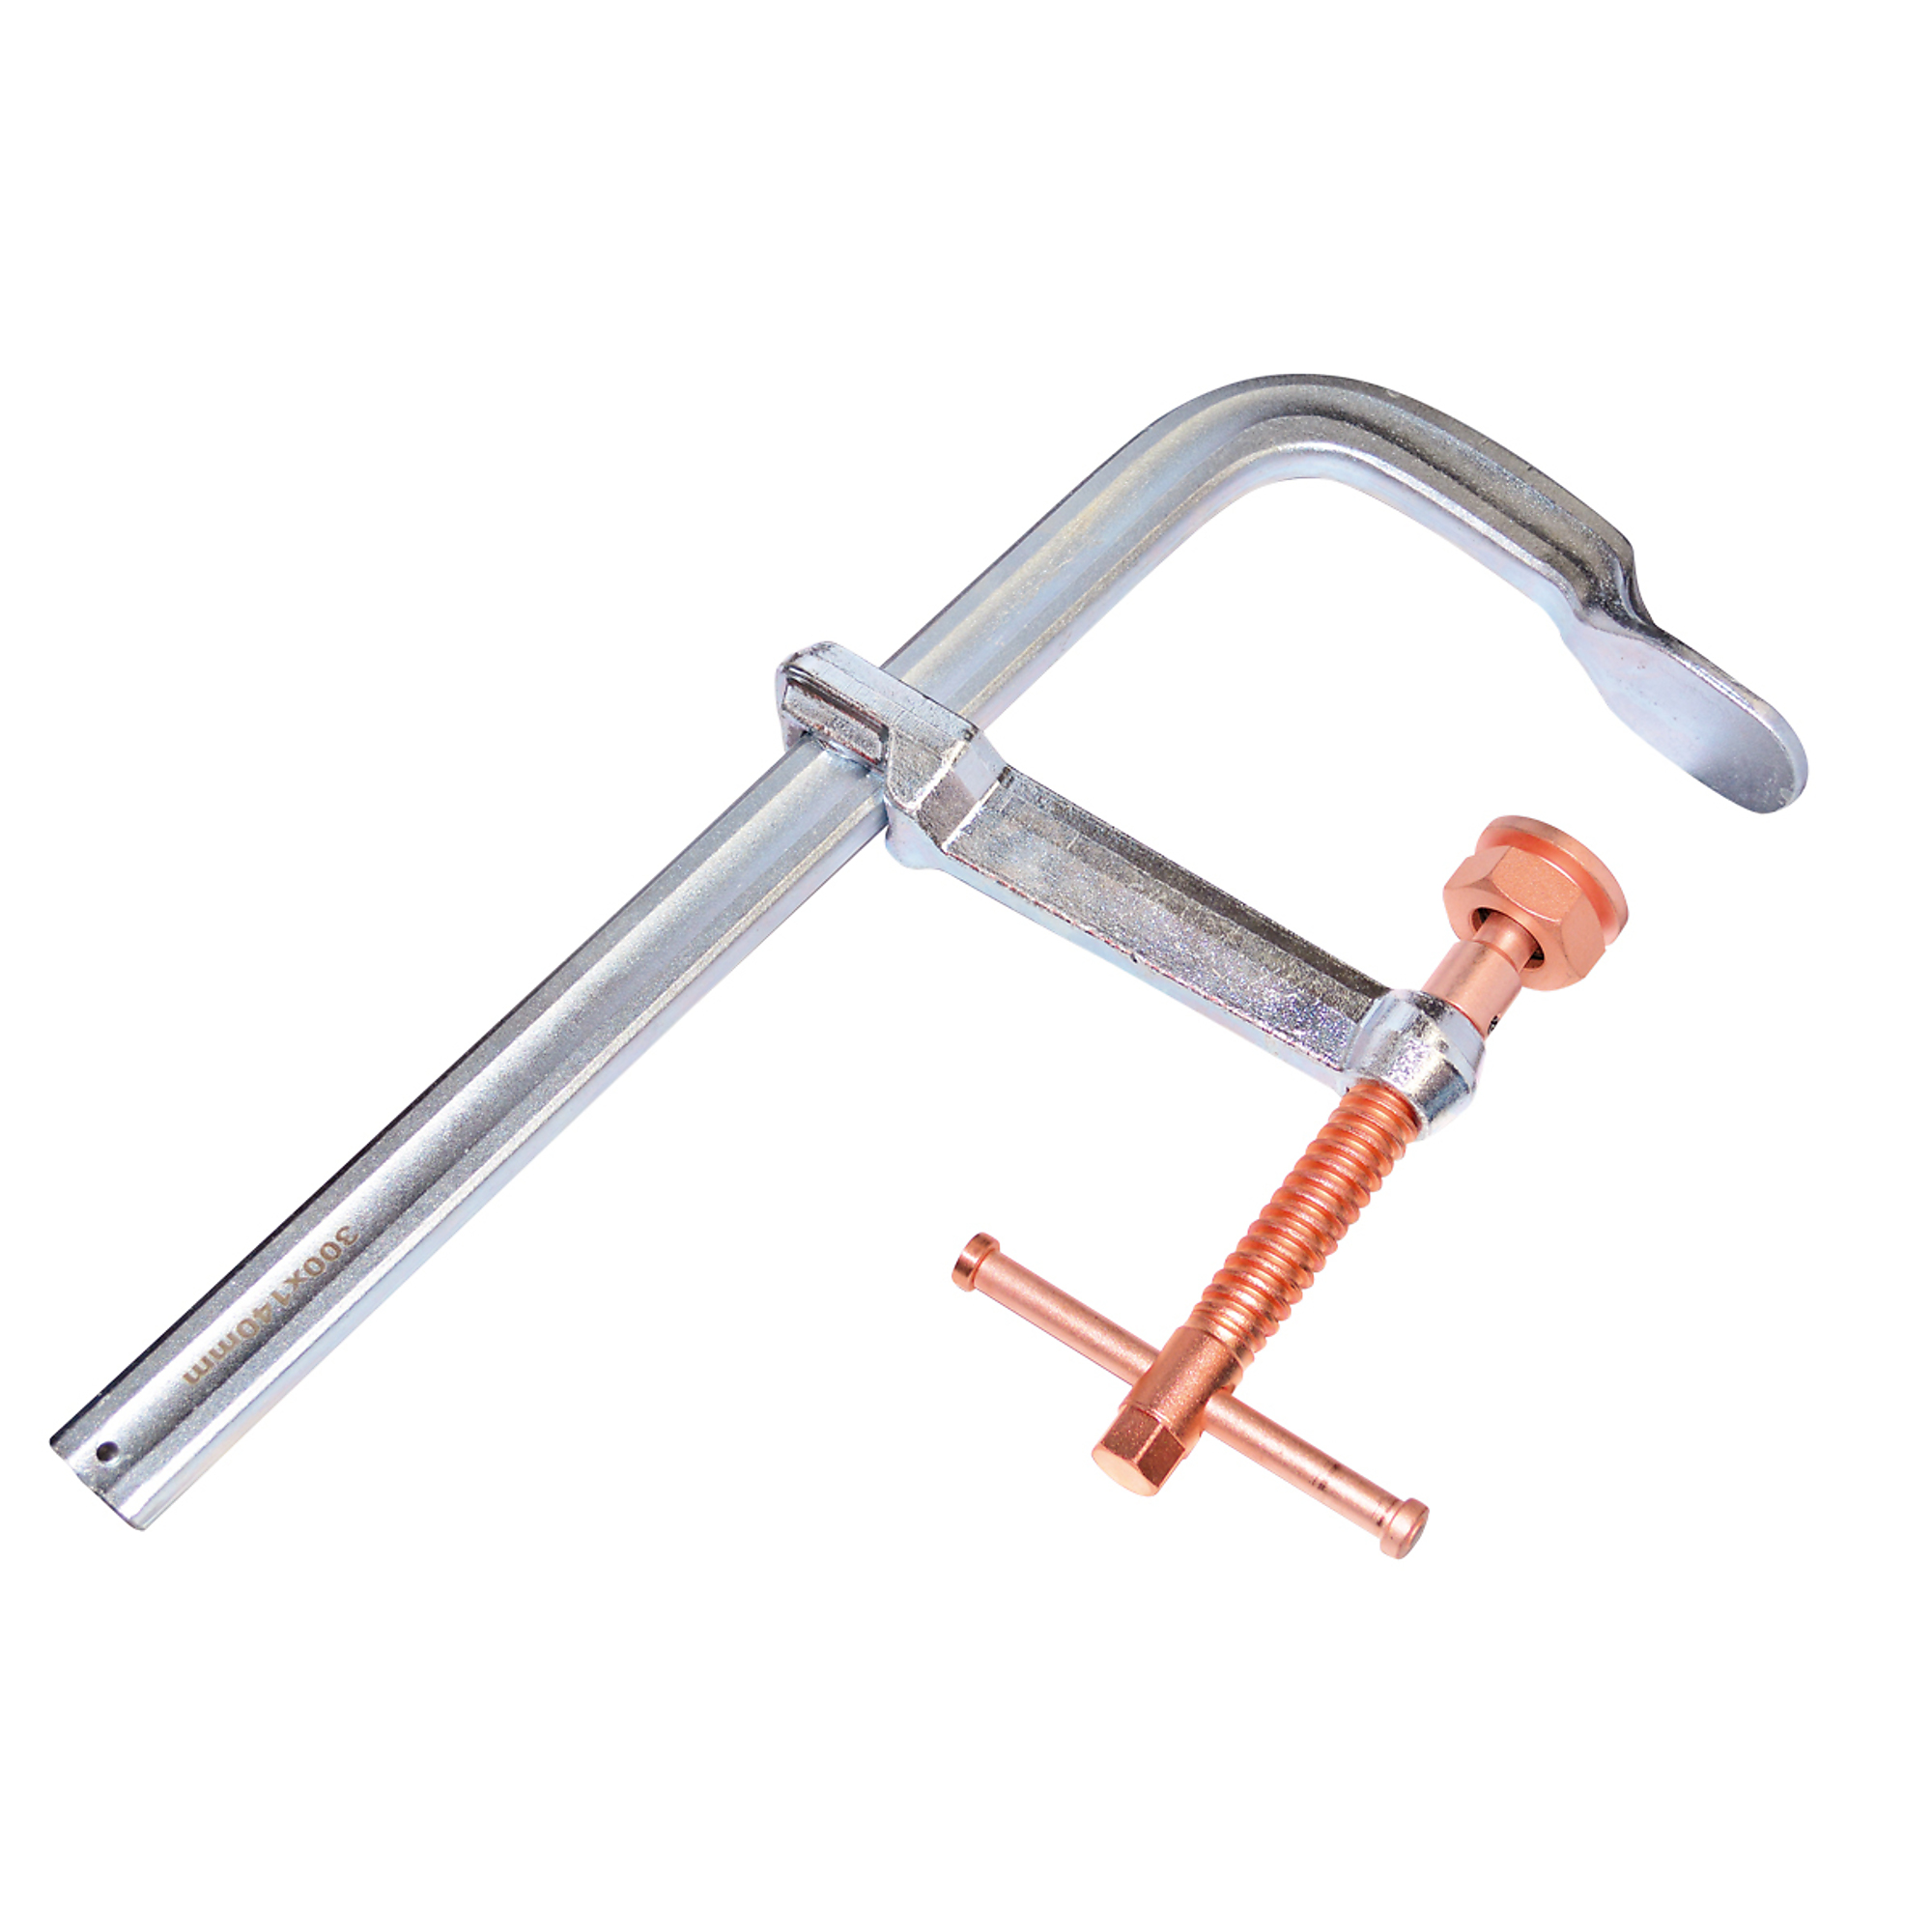 KANCA, HEAVY DUTY CLAMP W. COPPER SCREW 200 MM - 8Inch, Clamp Pressure 2700 lb, Opening Size 8 in, Pieces (qty.) 1 Model Heavy Duty Clamp w. Copper